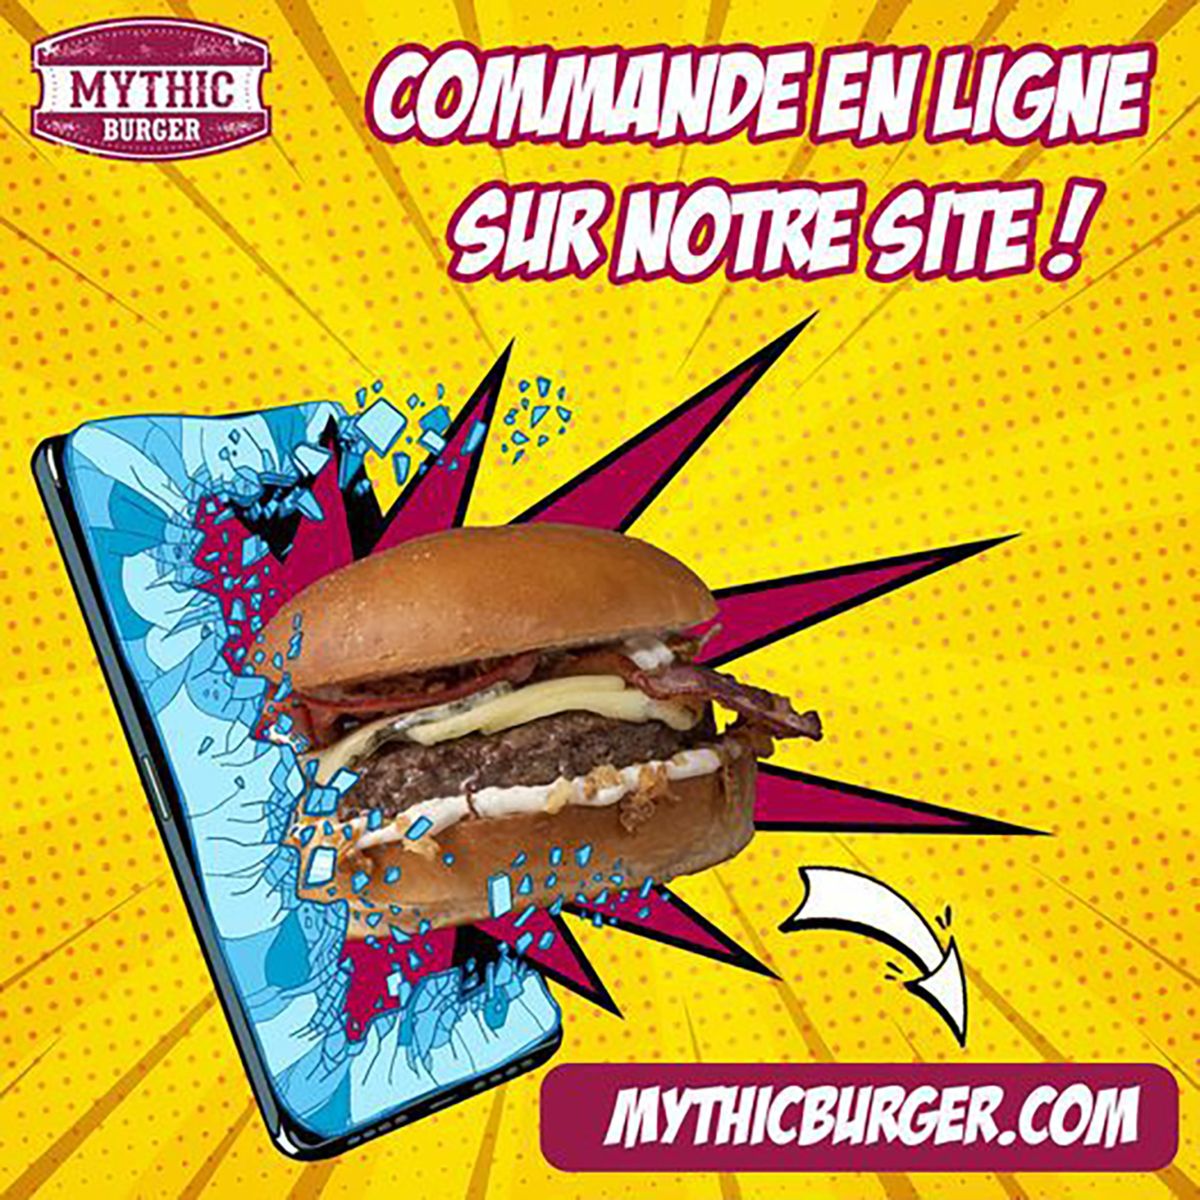 Catalogue Offres Mythic Burger, page 00002